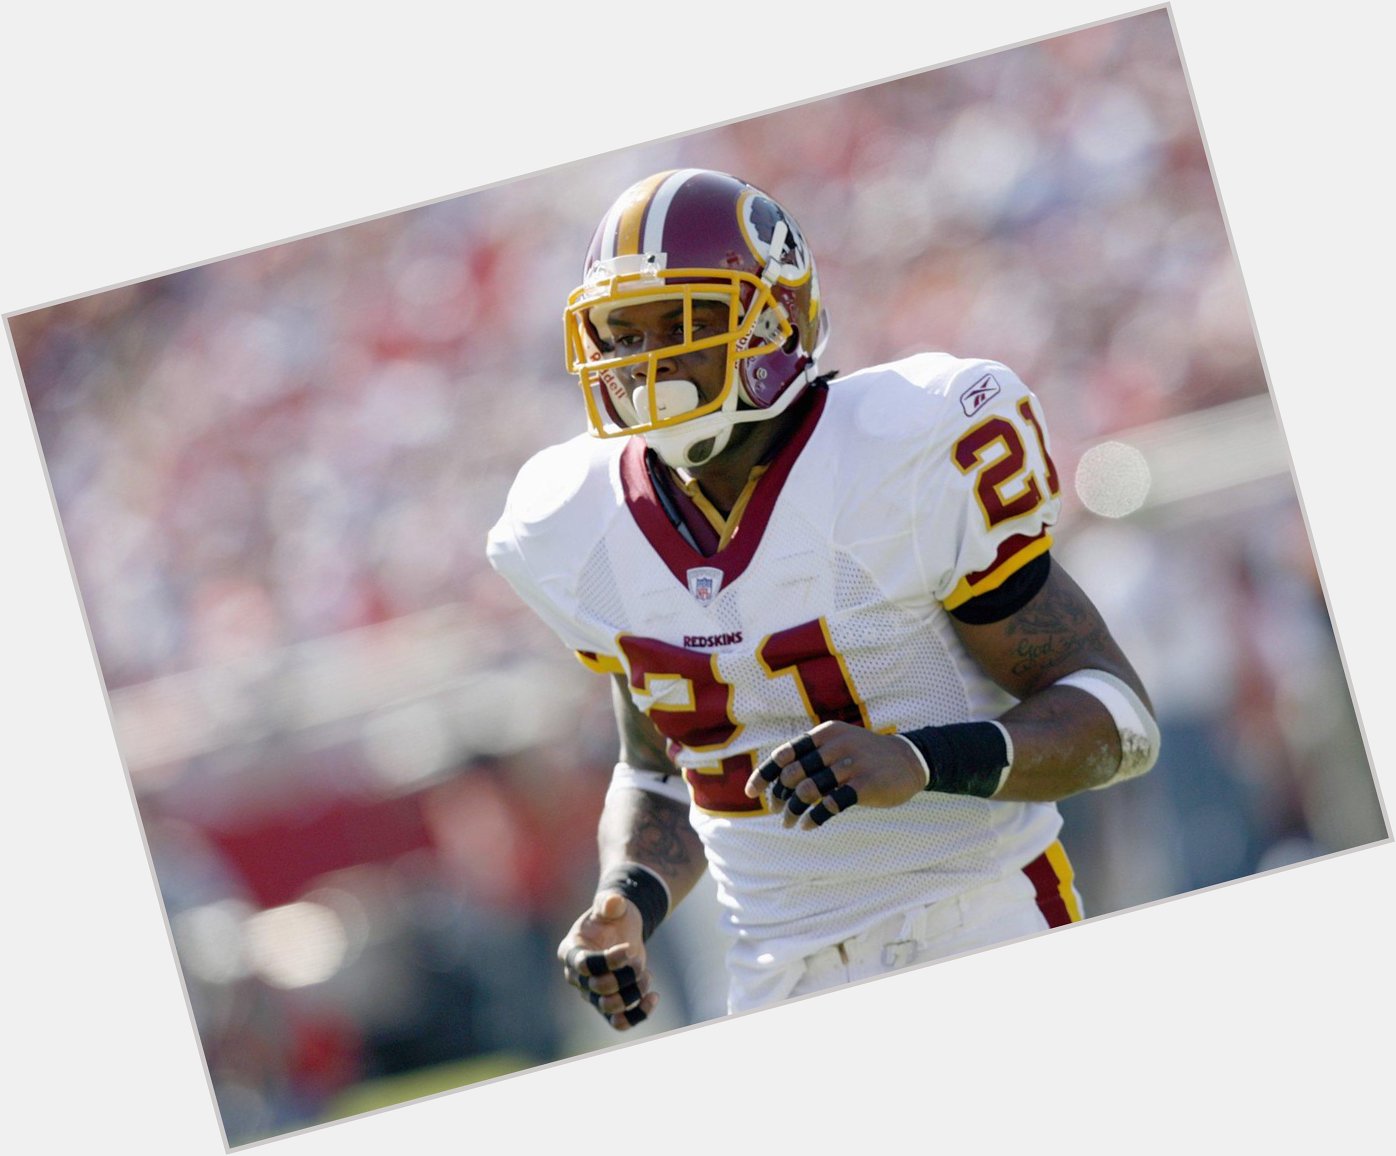 Happy Birthday to Sean Taylor, who would have turned 32 today! 